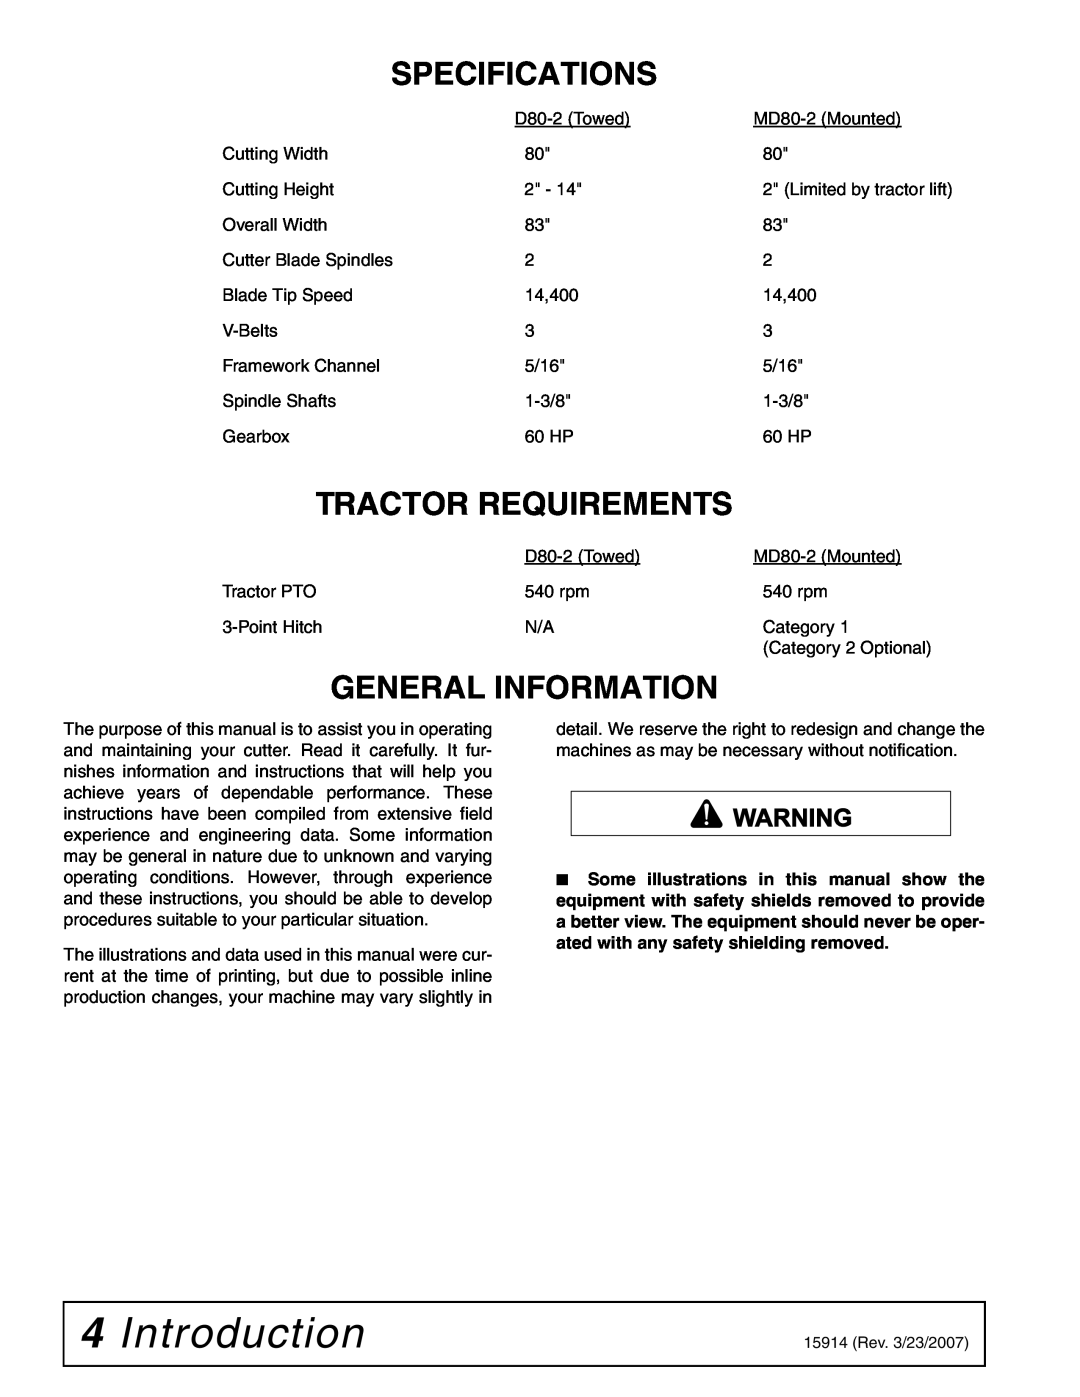 Woods Equipment MD80-2 manual Introduction, Specifications, Tractor Requirements, General Information 